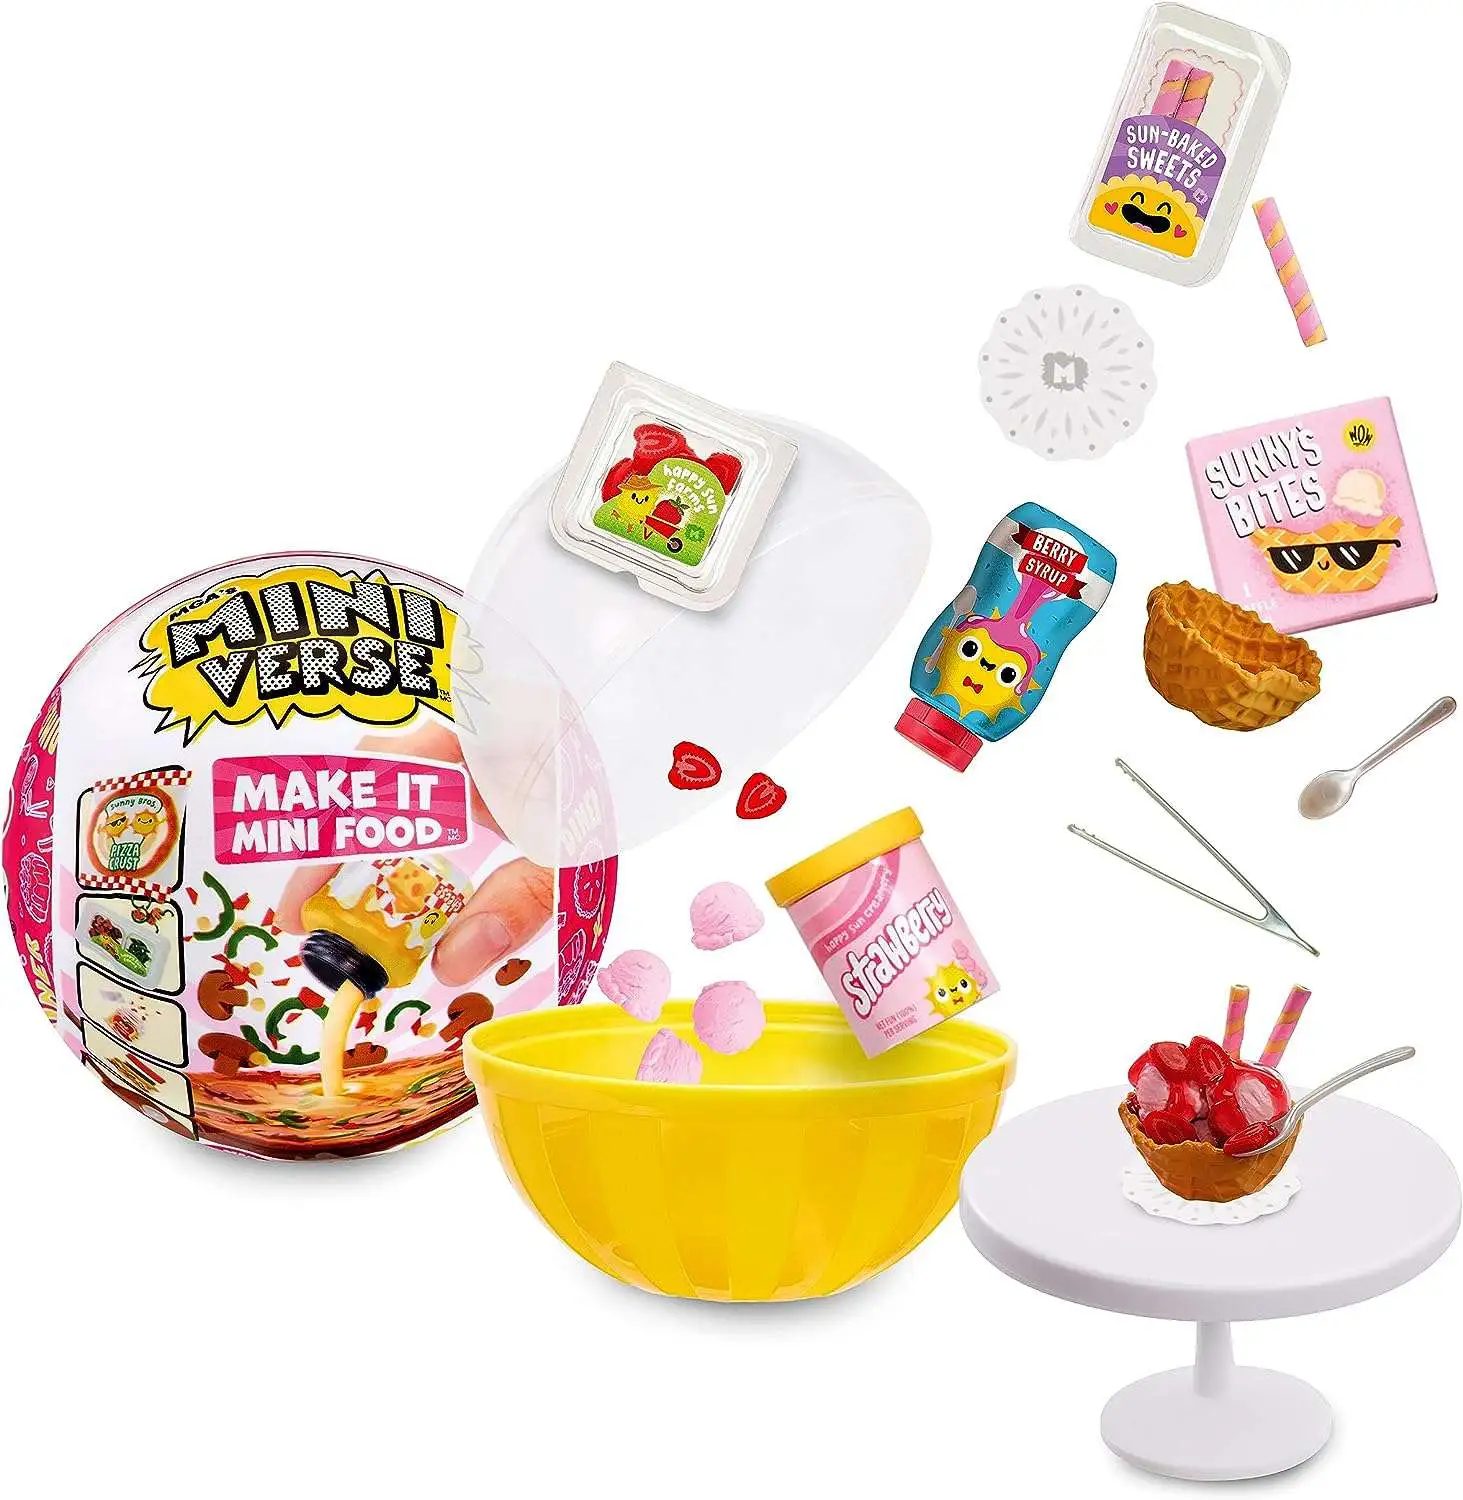 Claire's Mini Verse Make It Food Series 2 Blind Bag - Styles May Vary